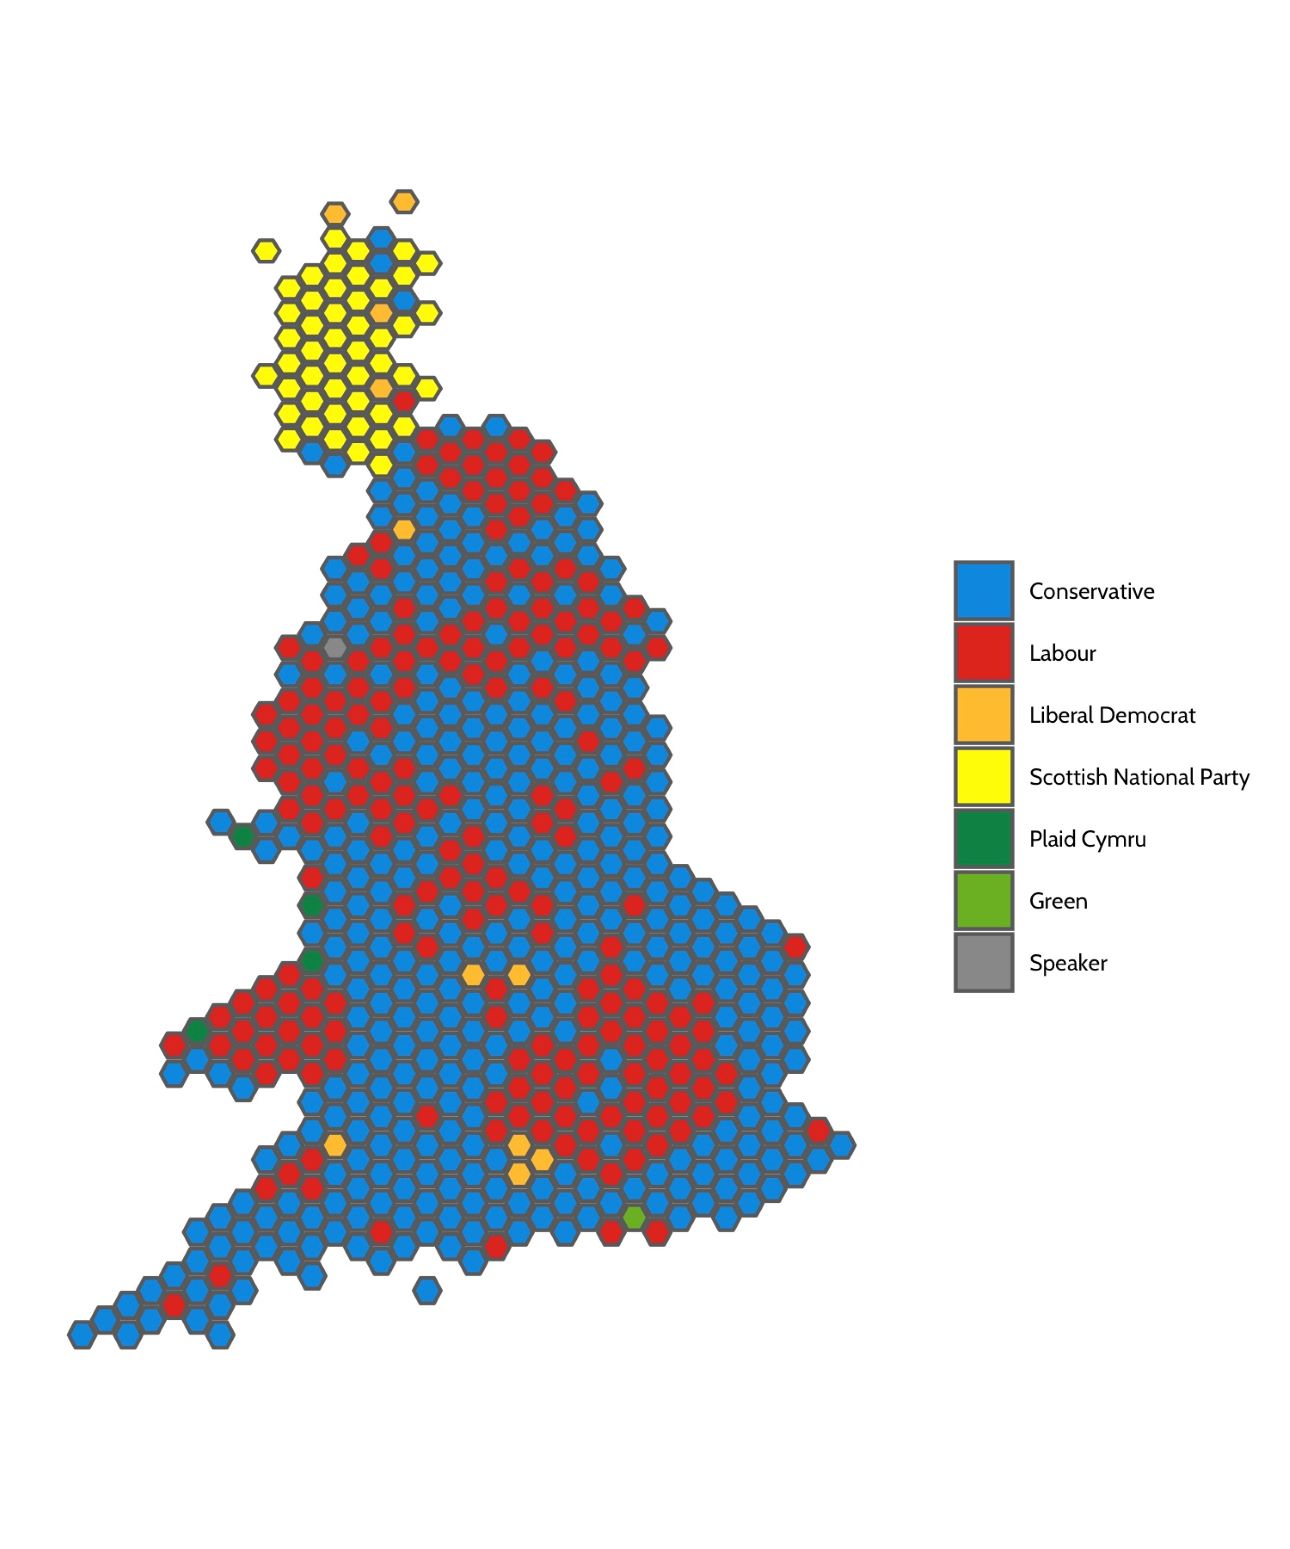 Demystifying The General Election In The UK: How Often Does It Happen And Why It Matters